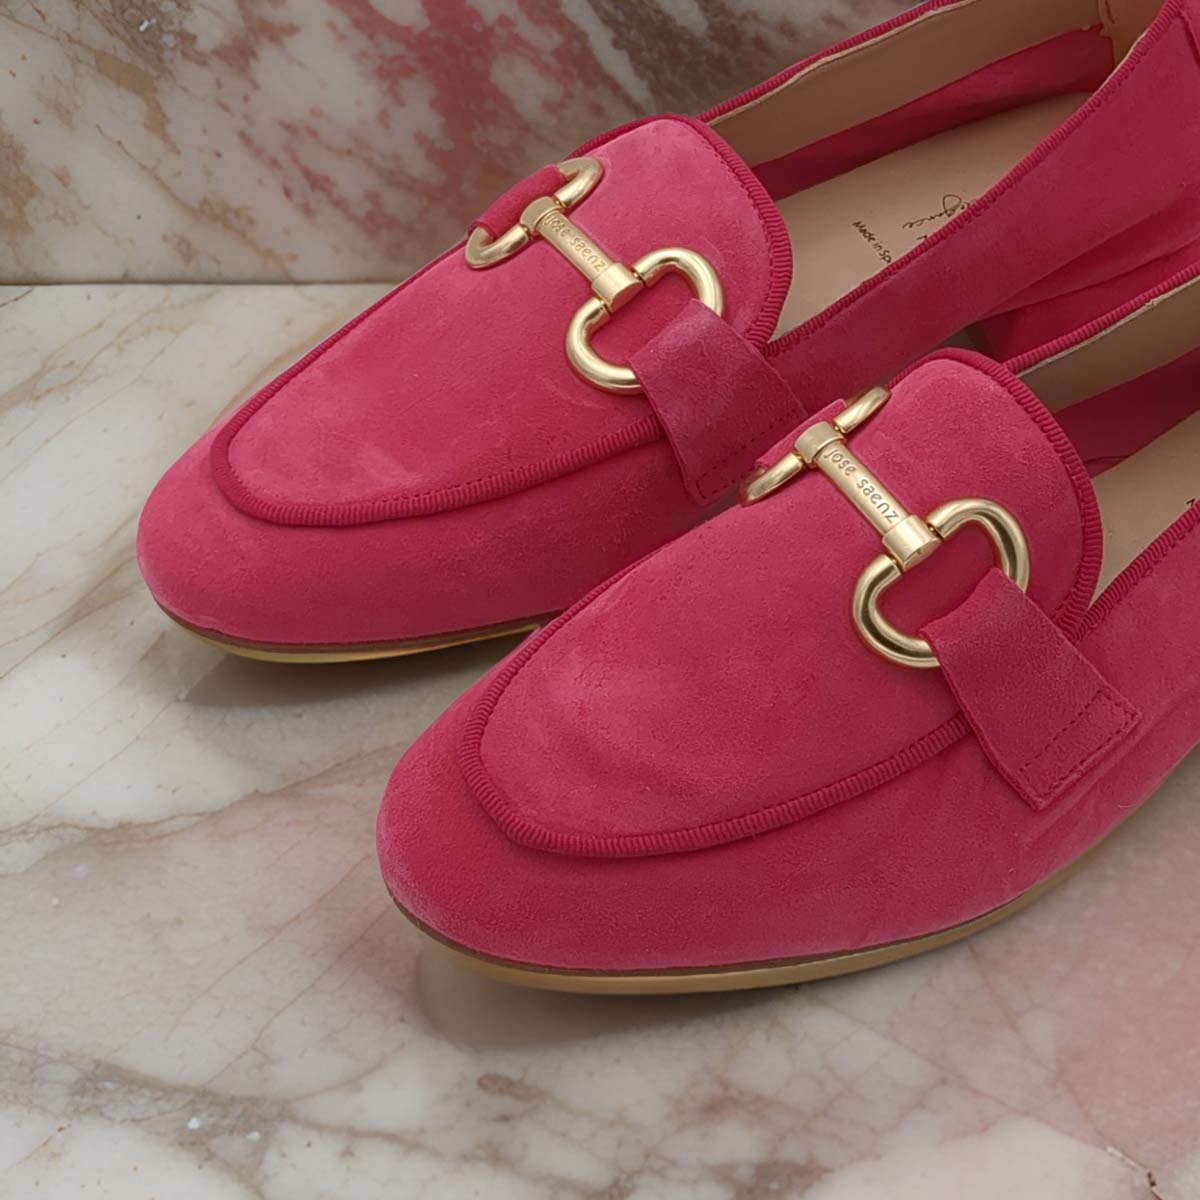 Jose Saenz Fuchsia Suede Loafers - Comfort & Gold Chain Detail